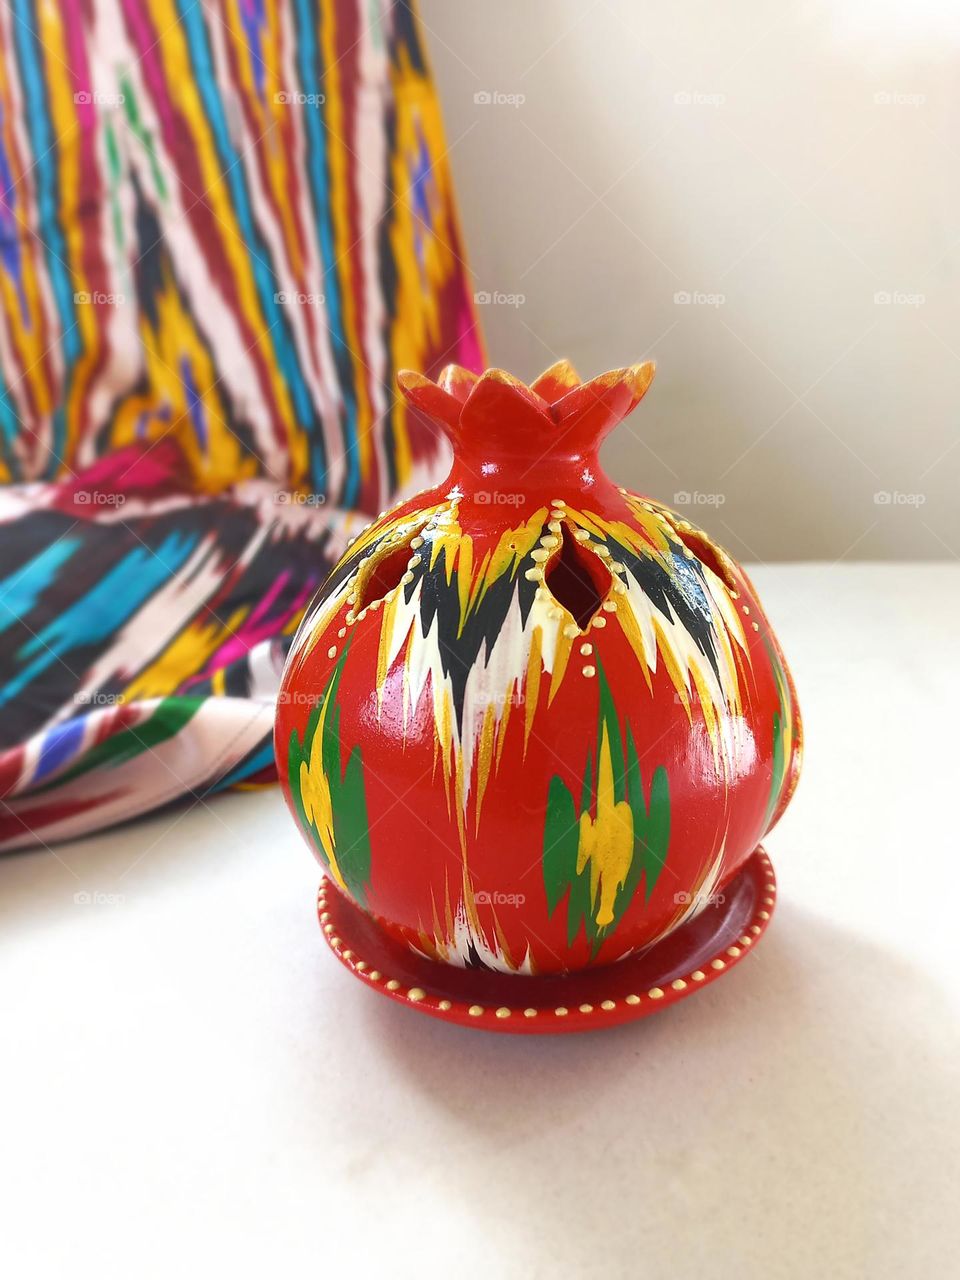 Uzbek national ceramic vase and satin fabric, rich and bright colors in the national color!